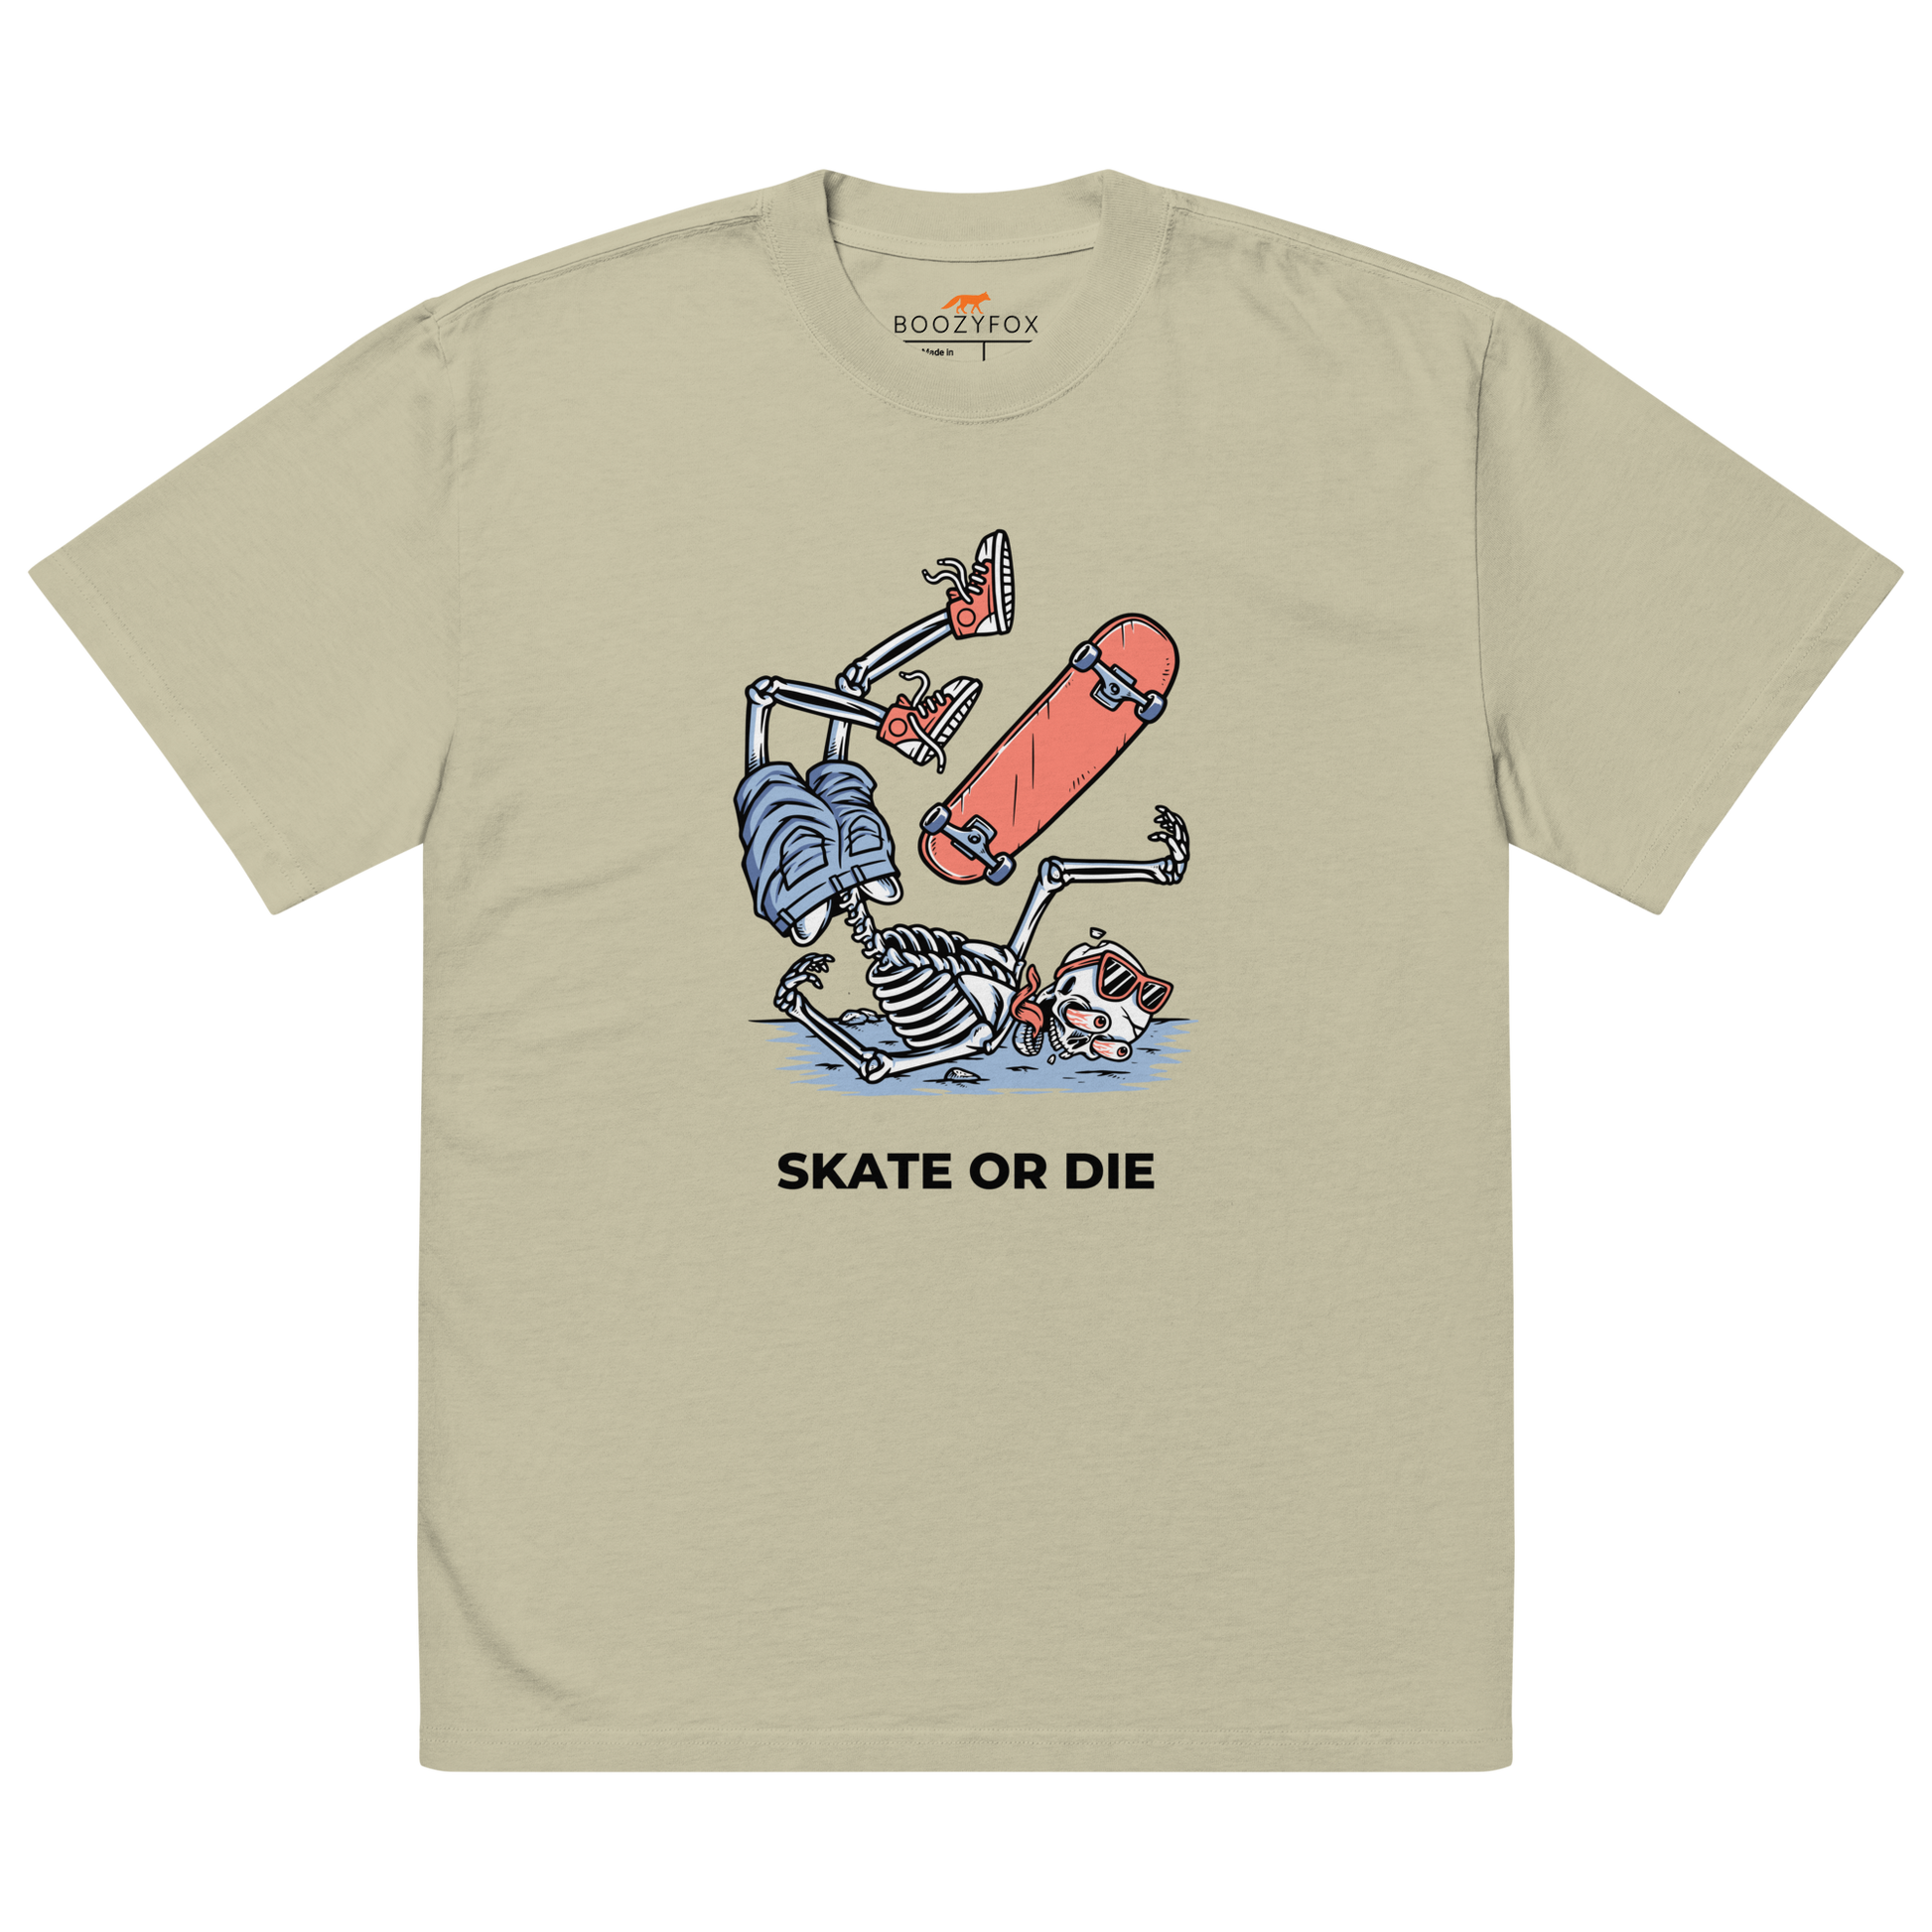 Faded Eucalyptus Skate or Die Oversized T-Shirt featuring a fearless Skeleton Falling While Skateboarding graphic on the chest - Cool Graphic Skeleton Oversized Tees - Boozy Fox